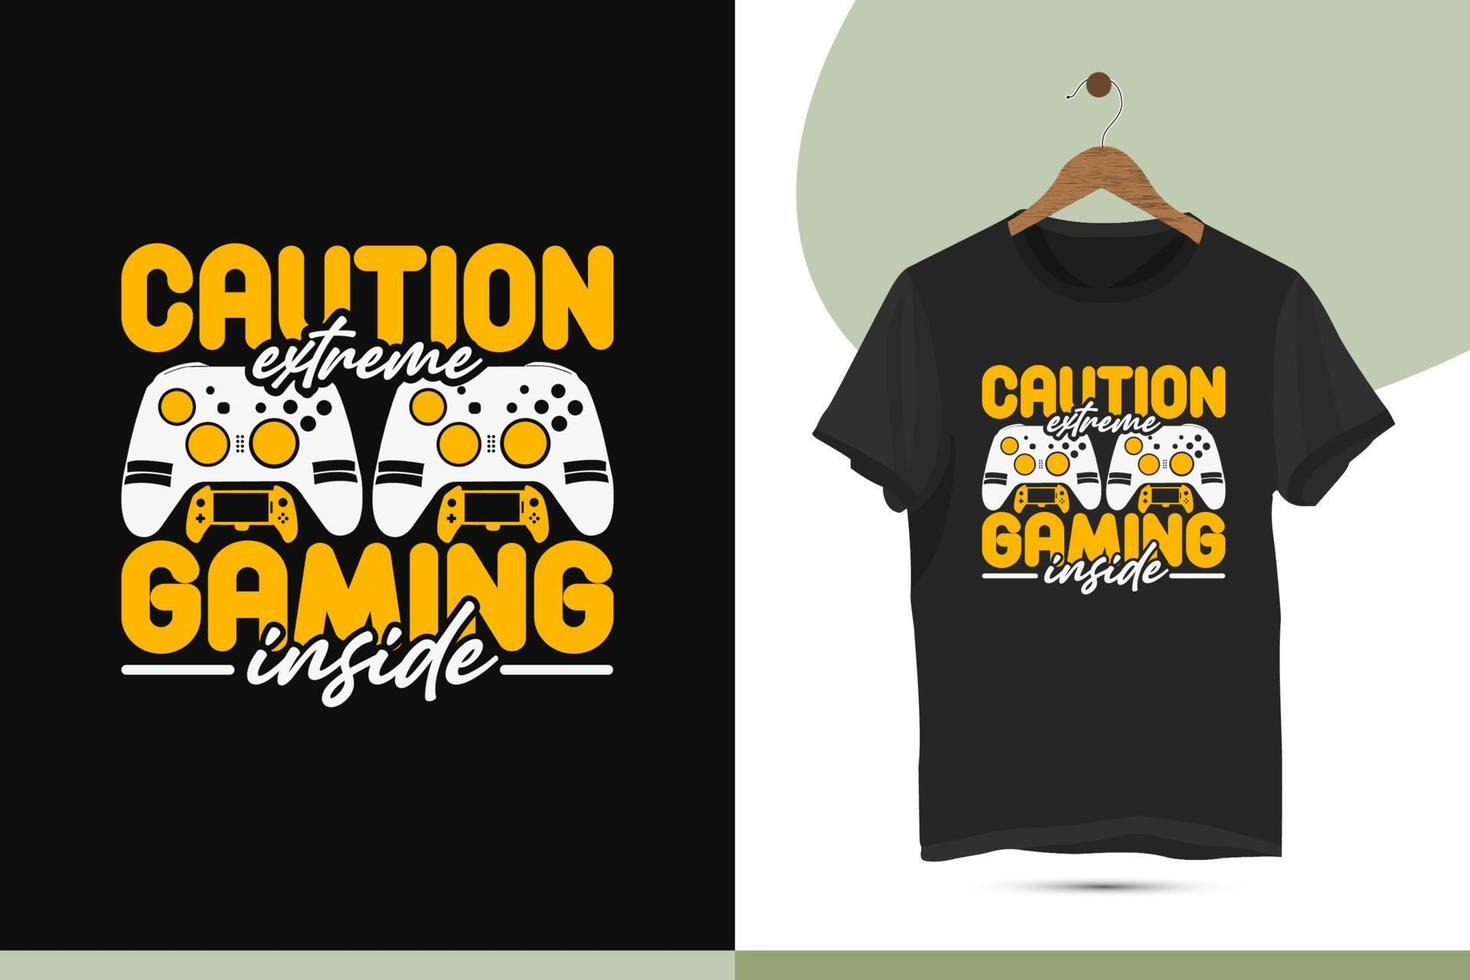 Caution extreme gaming inside - Custom gaming typography t-shirt design template. Vector design for a shirt, mug, greeting card, and poster. Editable and customizable illustration.